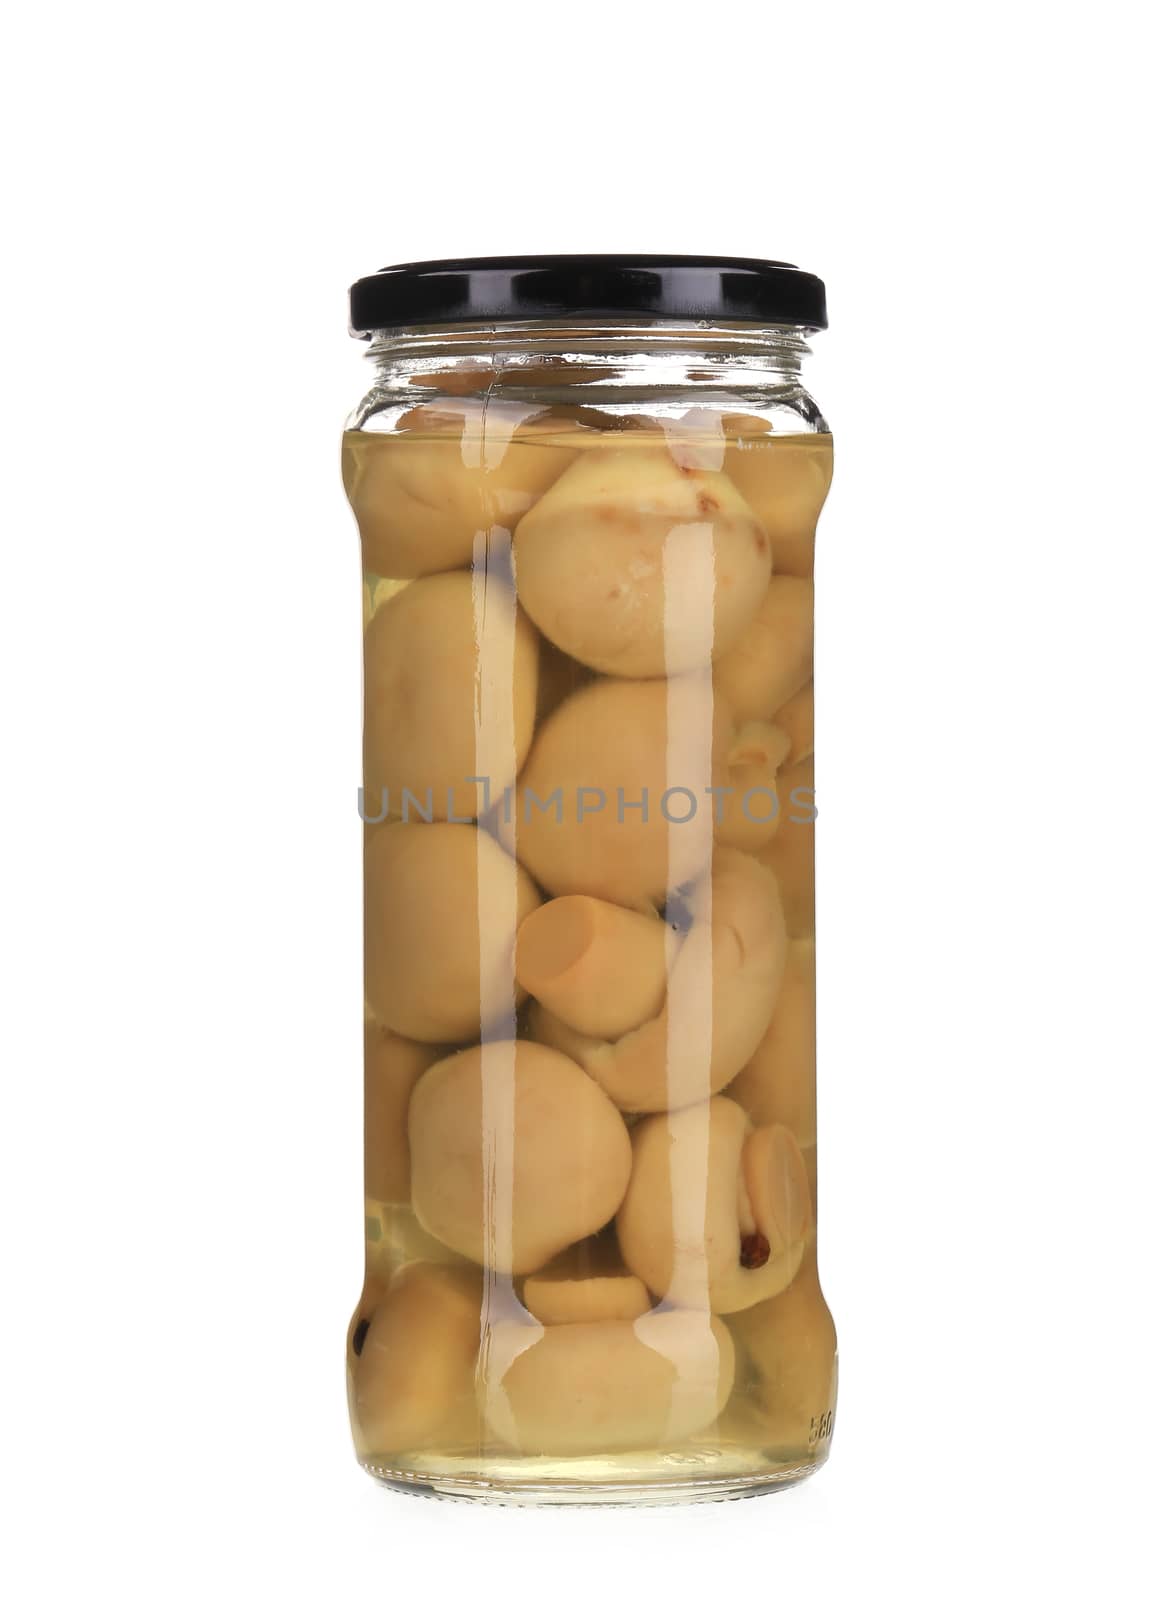 Marinated champignon mushrooms in glass jar. Isolated on a white background.